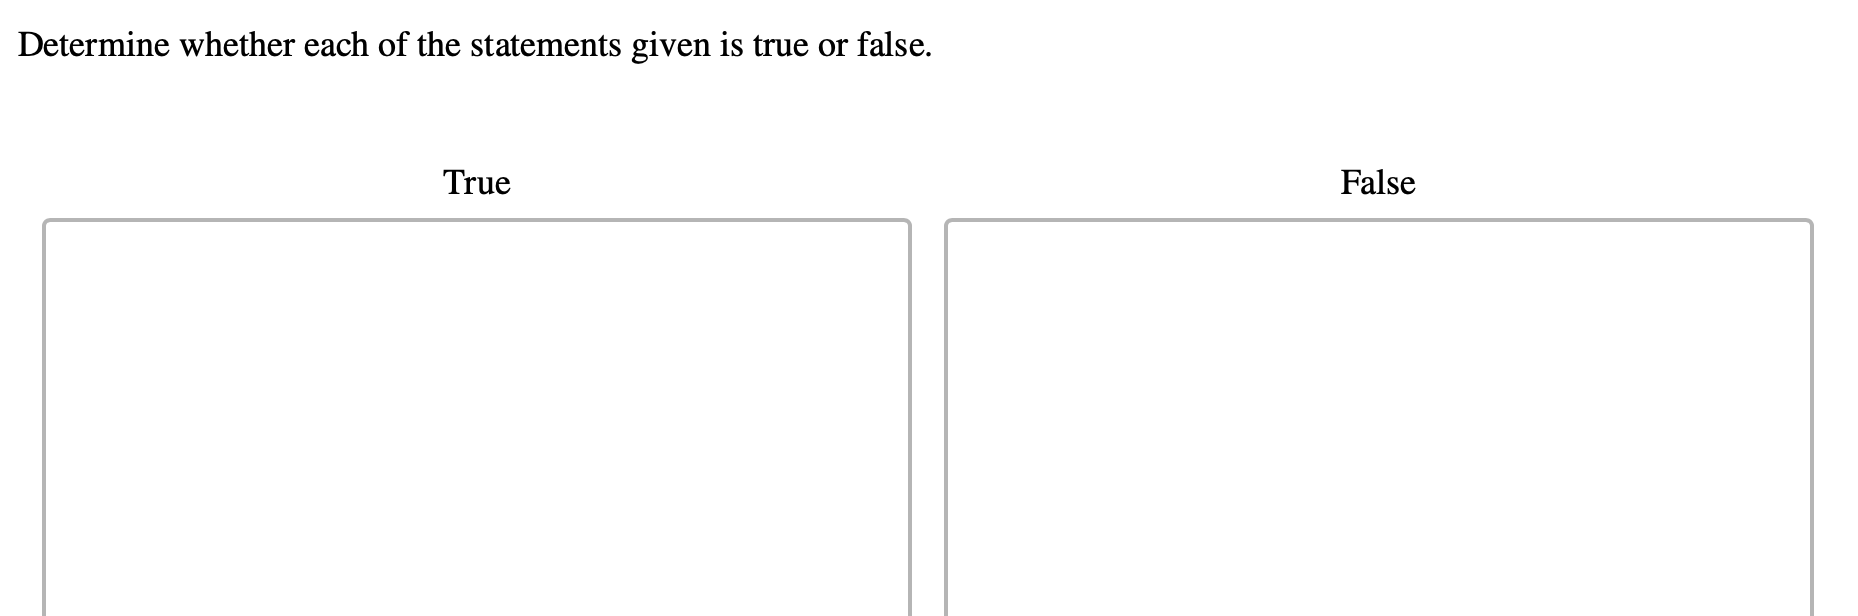 Determine whether each of the statements given is true or false.
